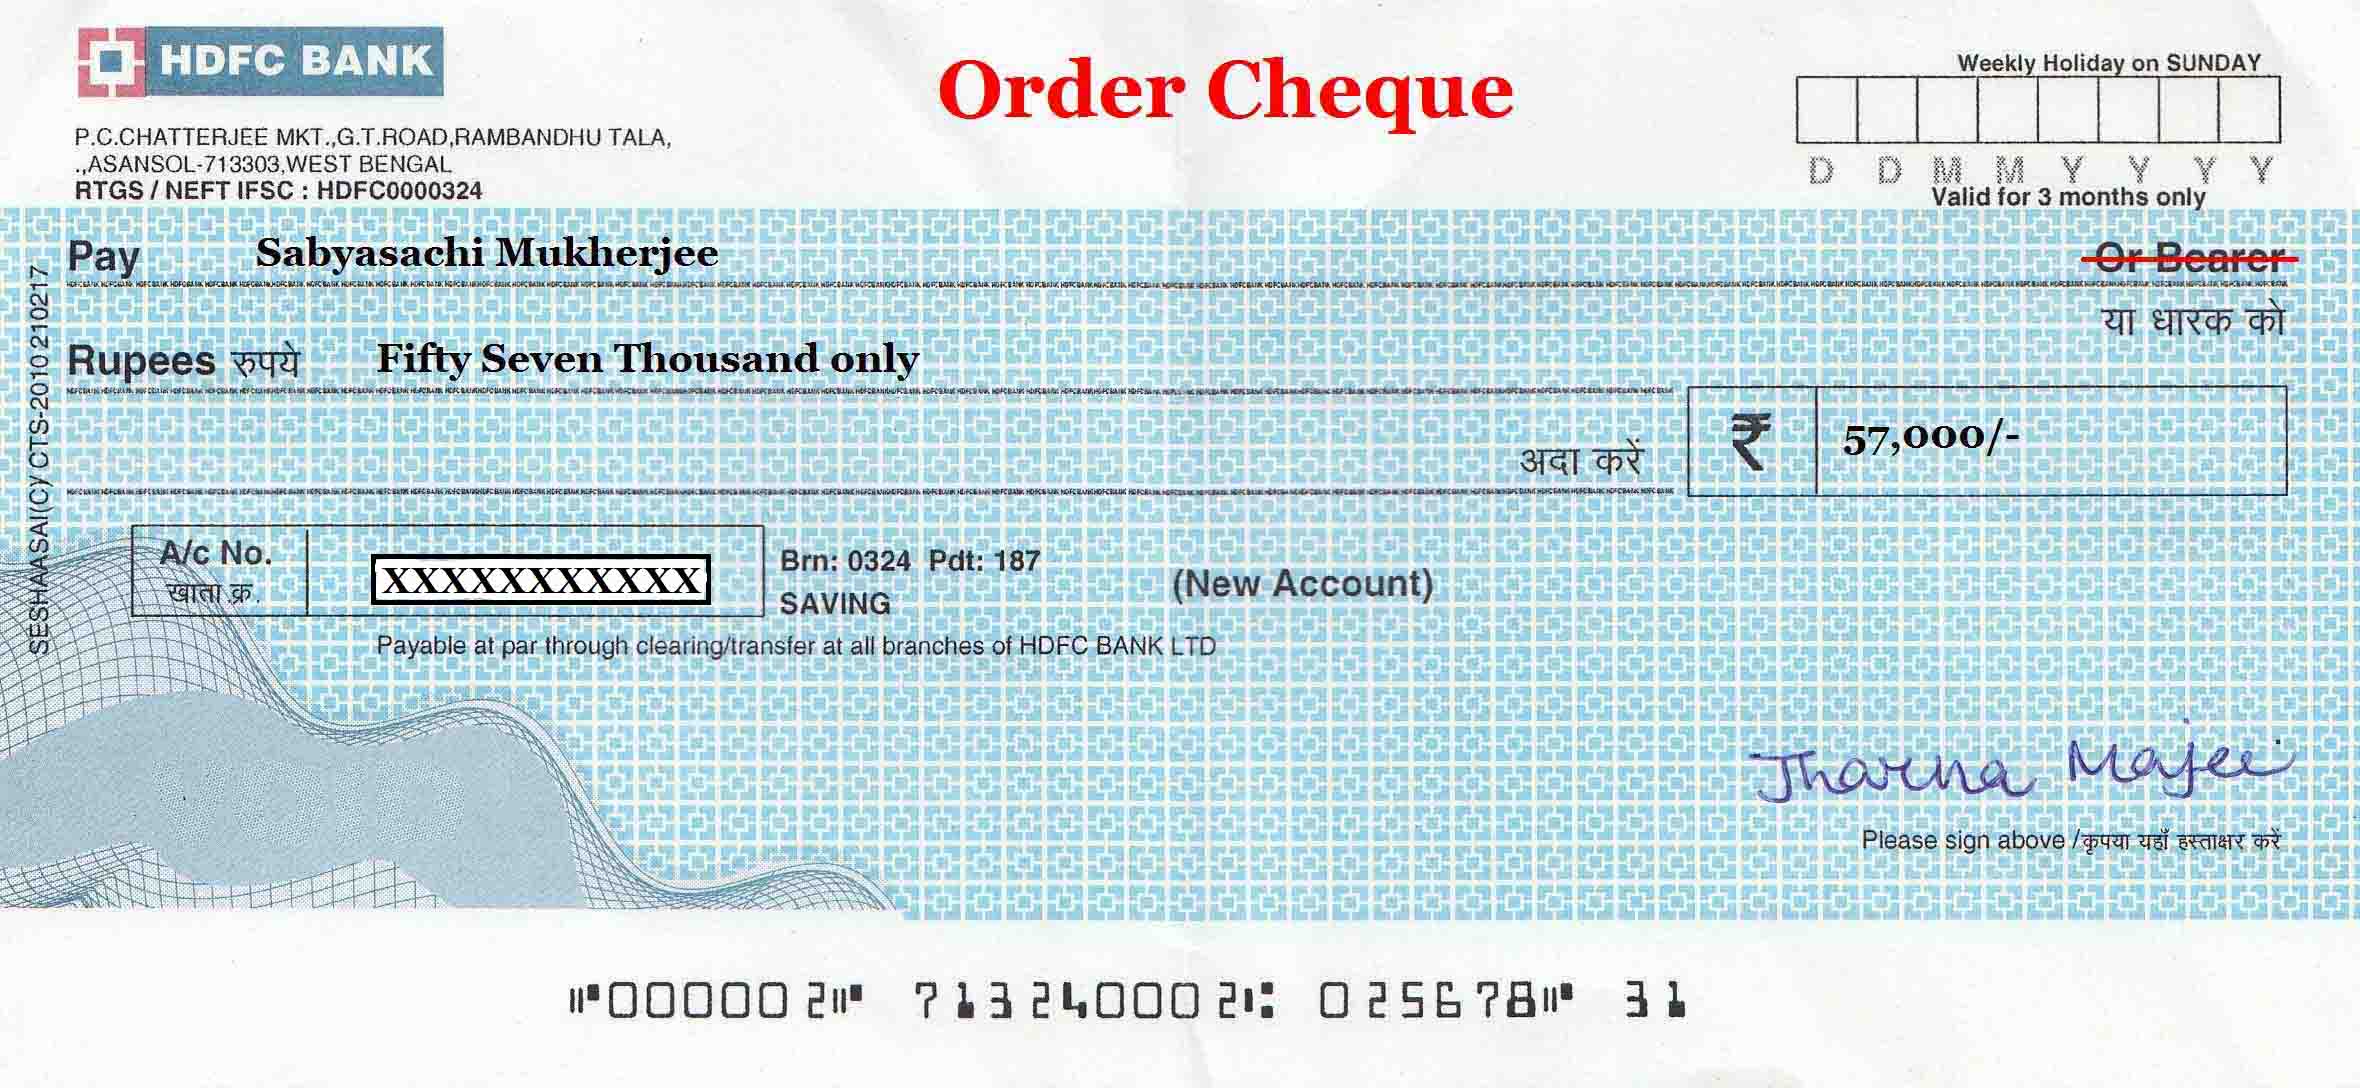 Types of cheques.